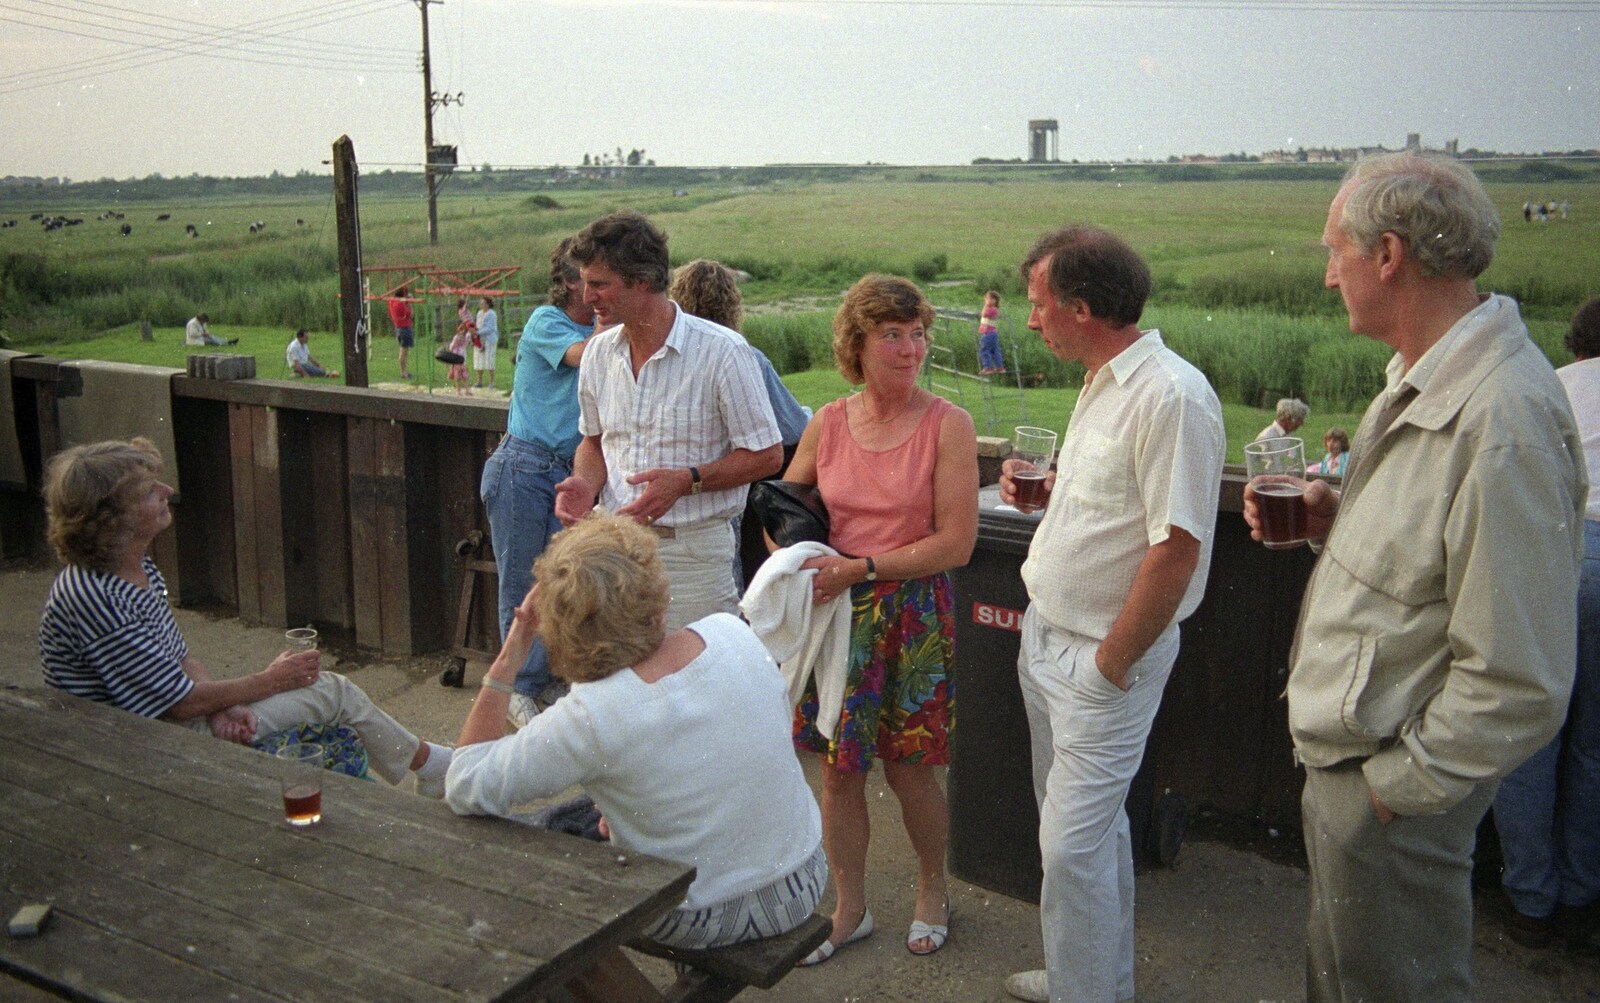 Geoff and Brenda at the Harbour Inn, Southwold from The Diss Raft Race, Diss Mere, Norfolk - 6th July 1991